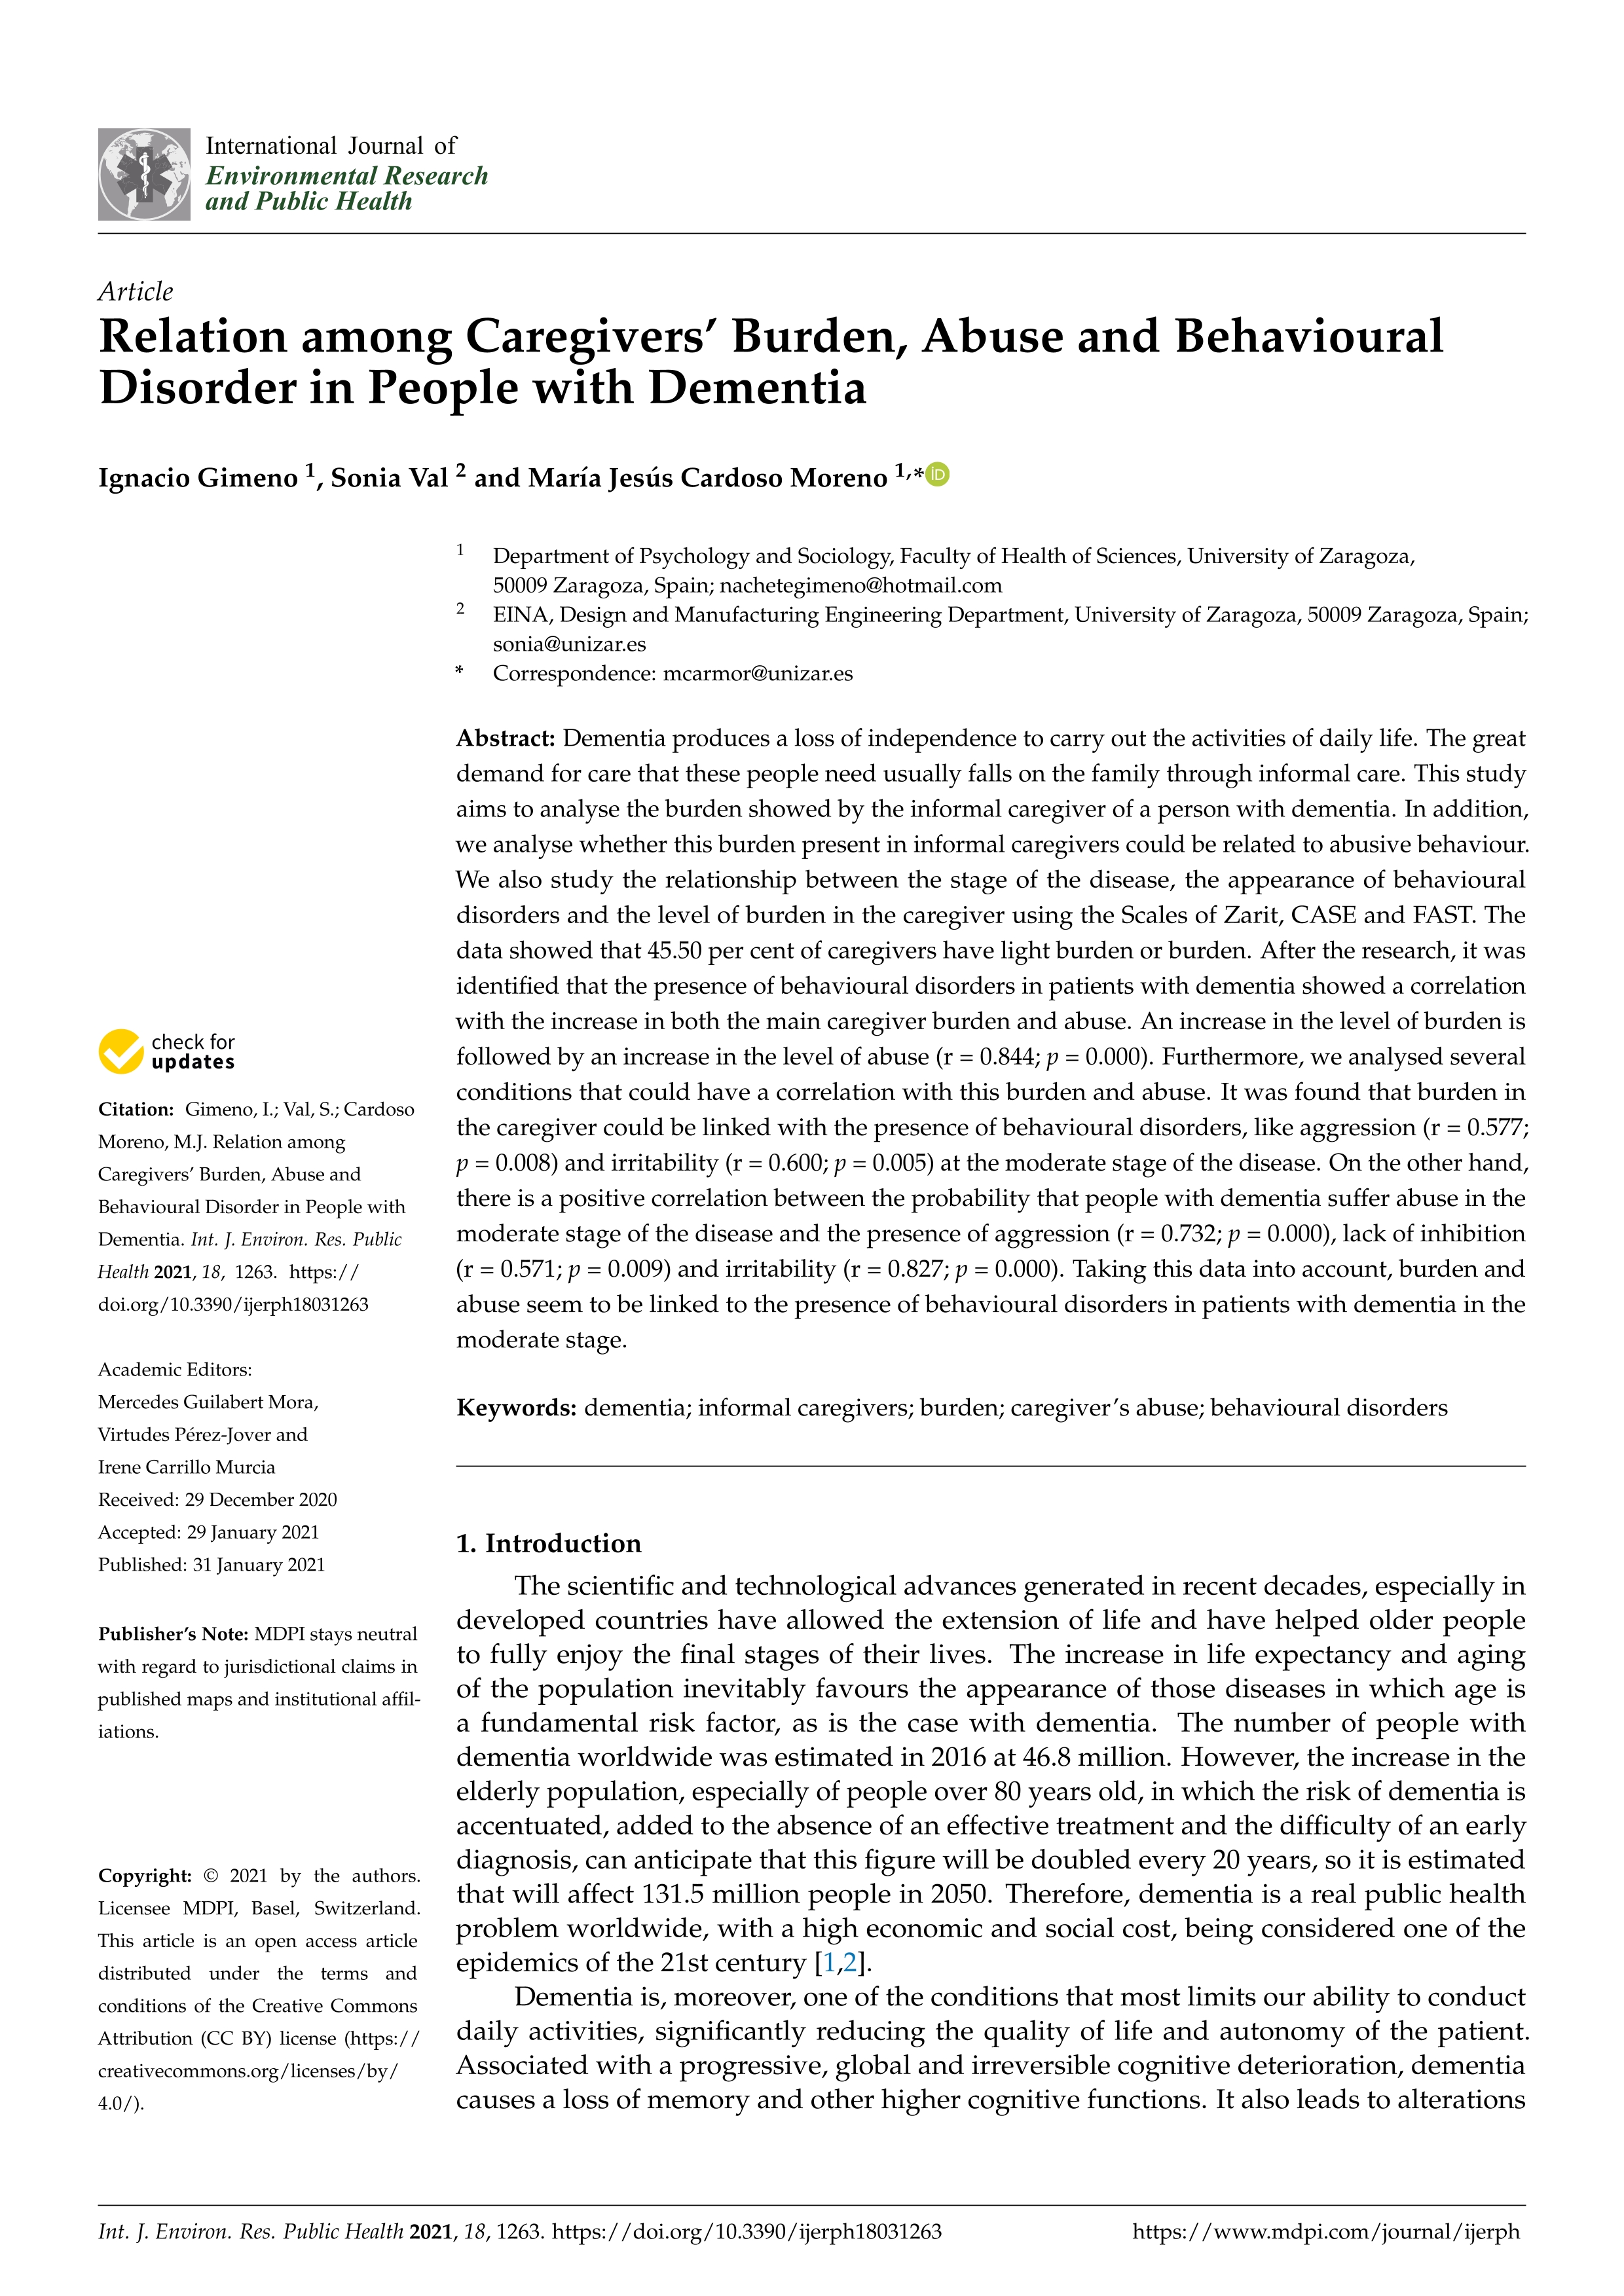 Relation among Caregivers’ Burden, Abuse and Behavioural Disorder in People with Dementia